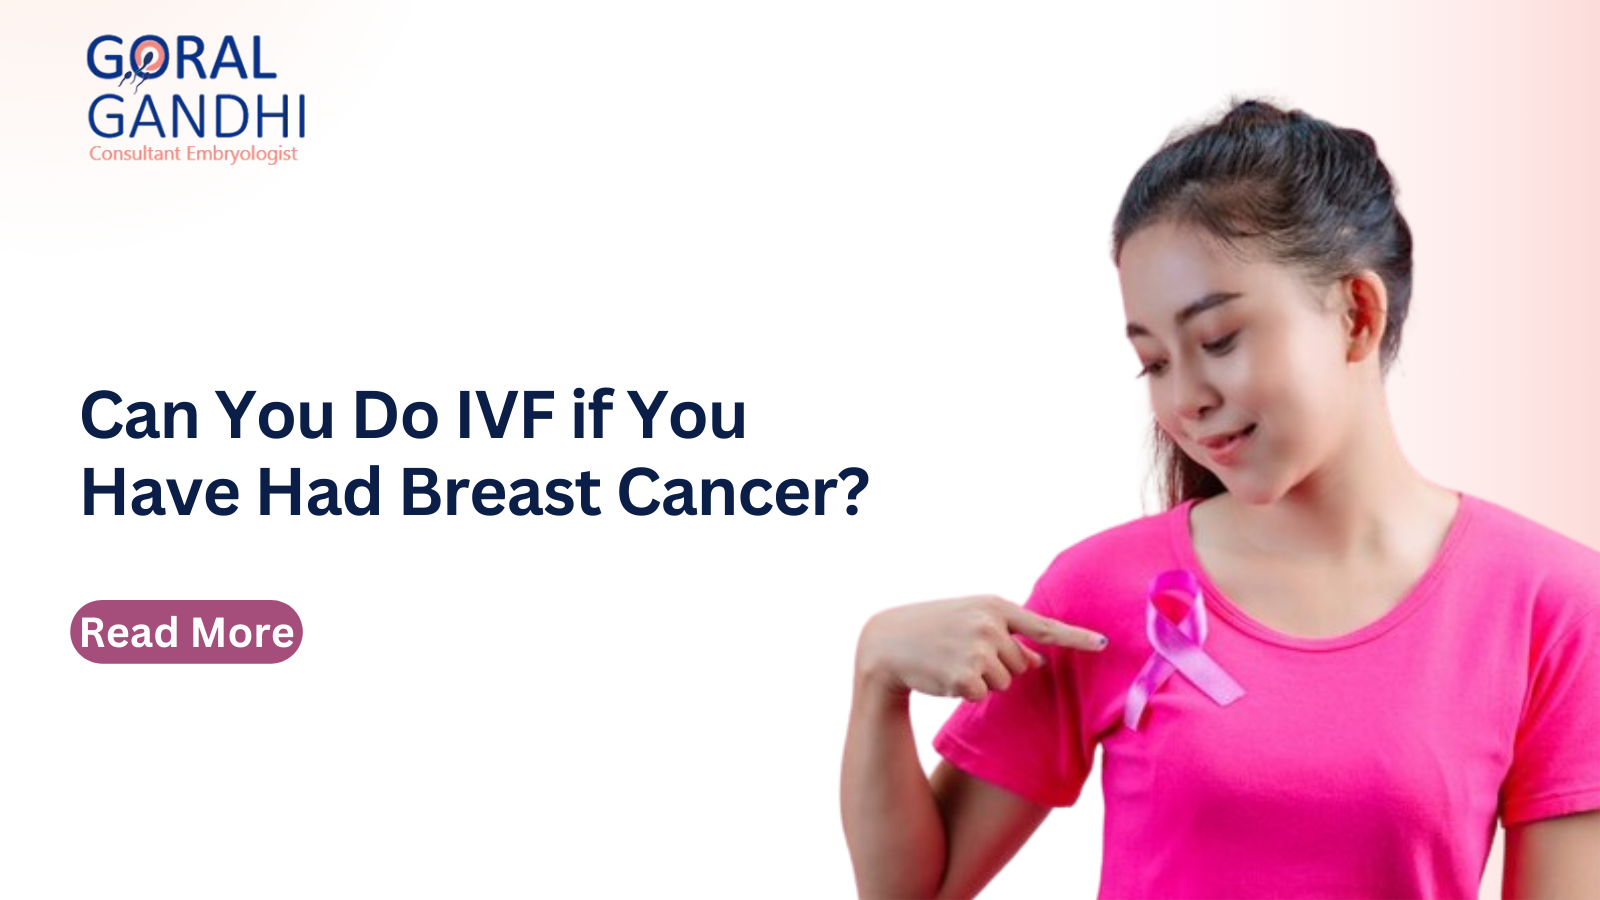 Can You Do IVF if You Have Had Breast Cancer